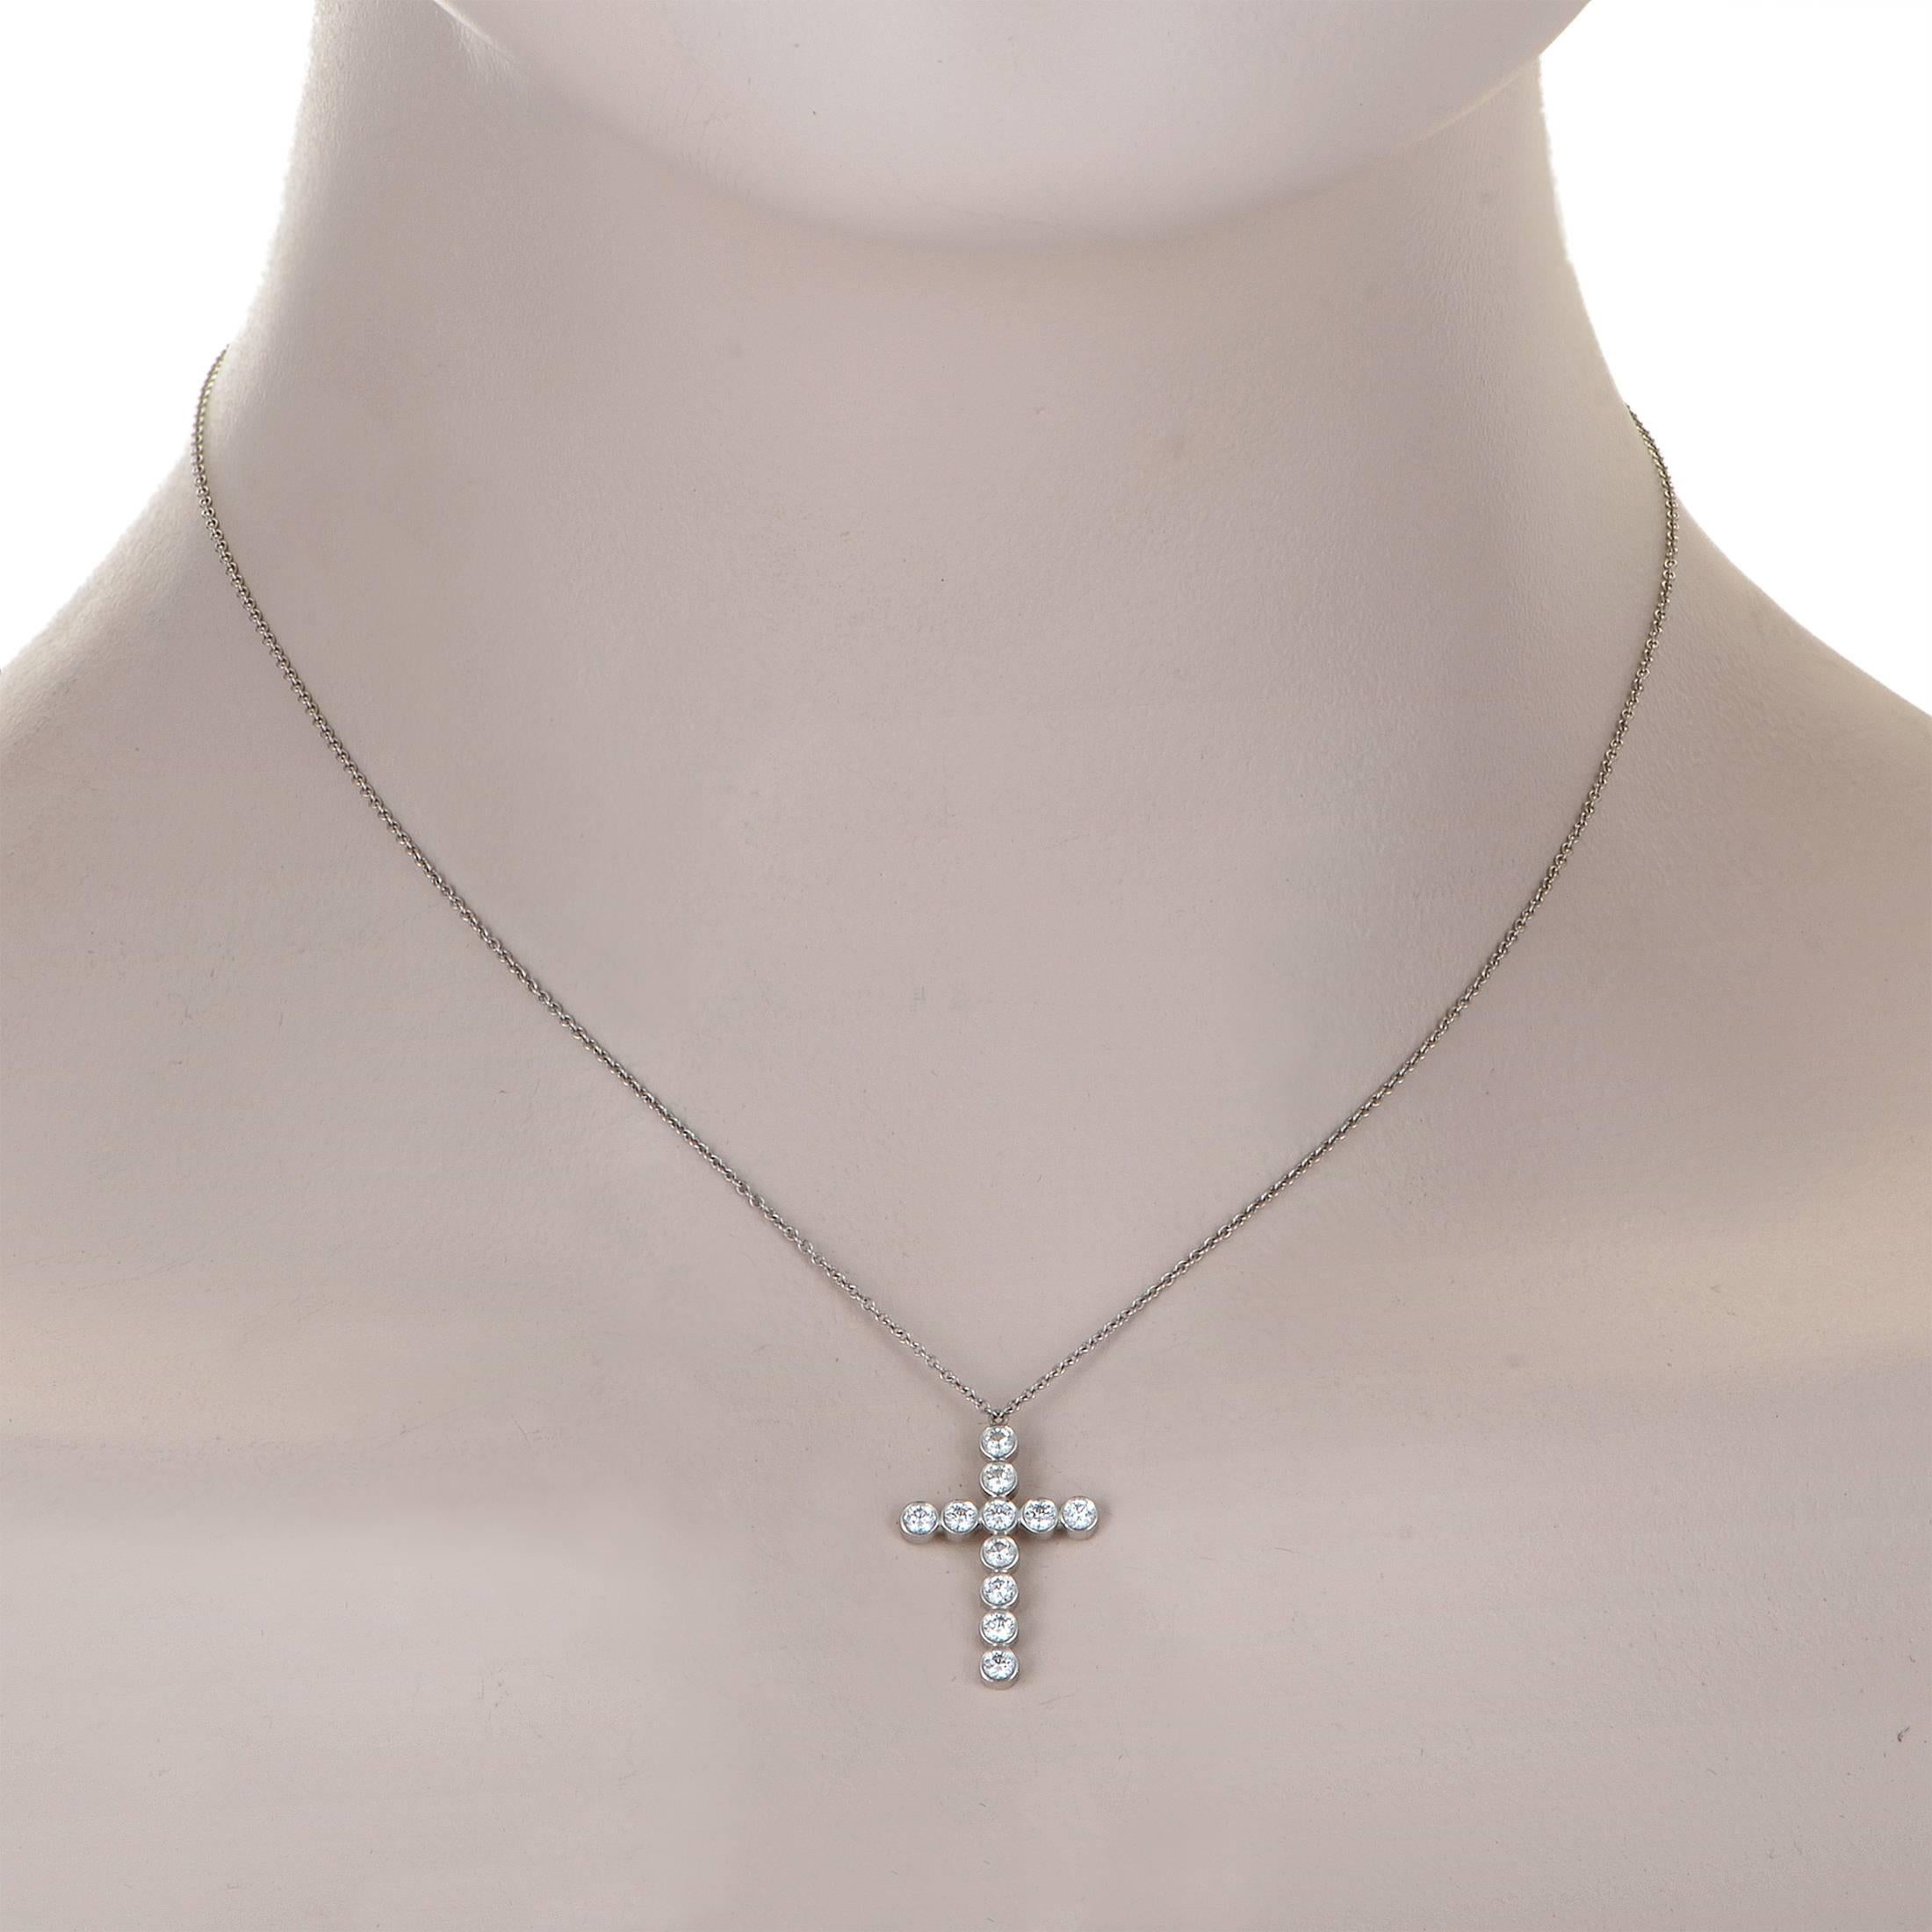 Given a mesmerizing visual effect by the addition of scintillating diamonds weighing in total 0.50ct, the astounding symbol of a cross is employed brilliantly in the pendant of this magnificent platinum necklace from Tiffany & Co.
Included Items: